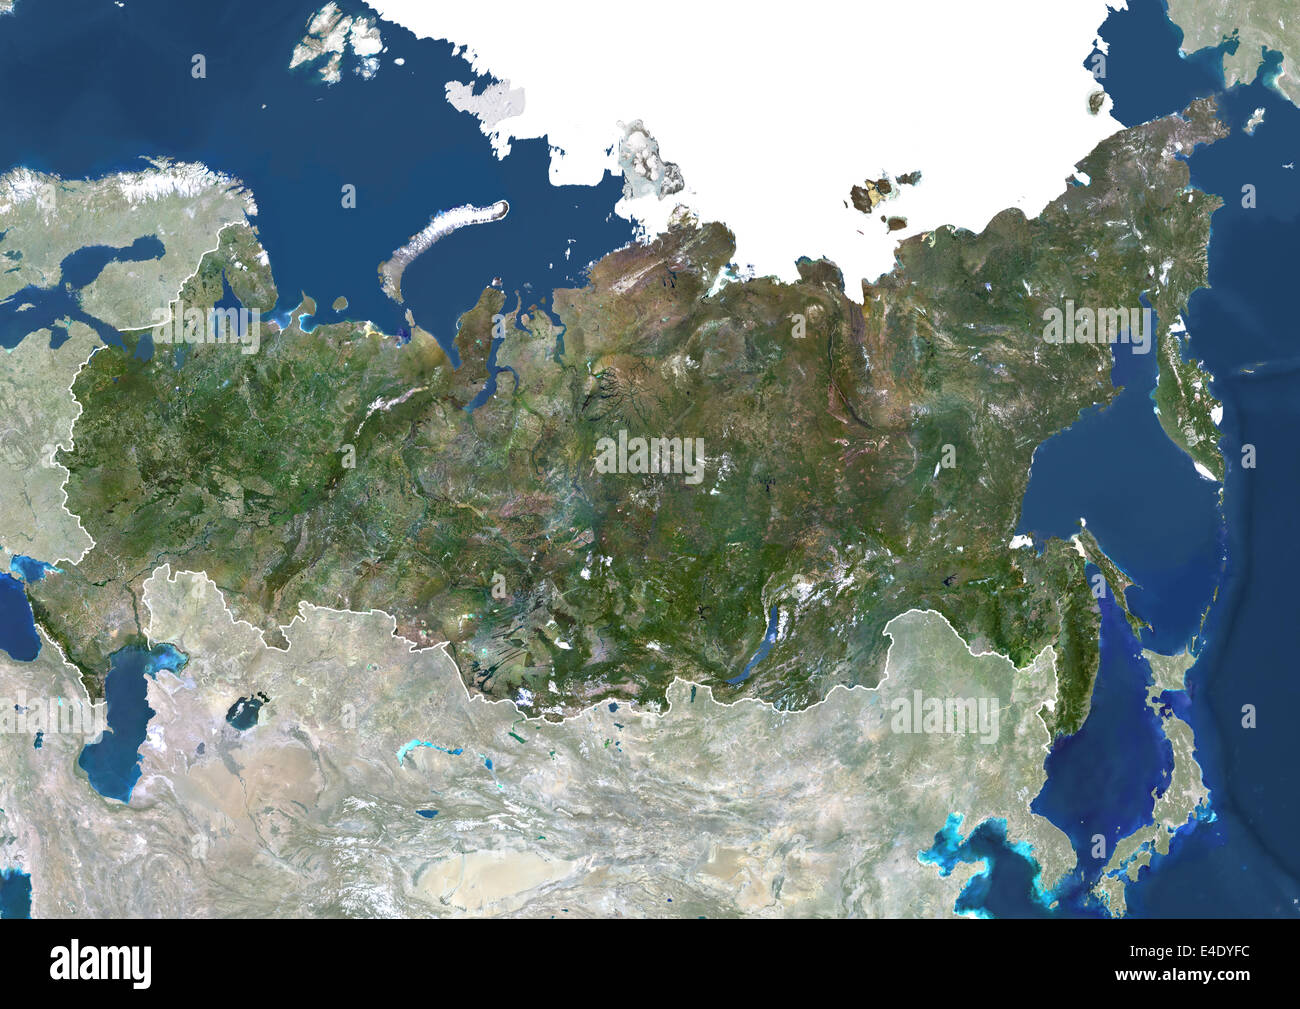 Russia, True Colour Satellite Image With Mask And Border. Russia, true colour satellite image with mask and border. Composite im Stock Photo